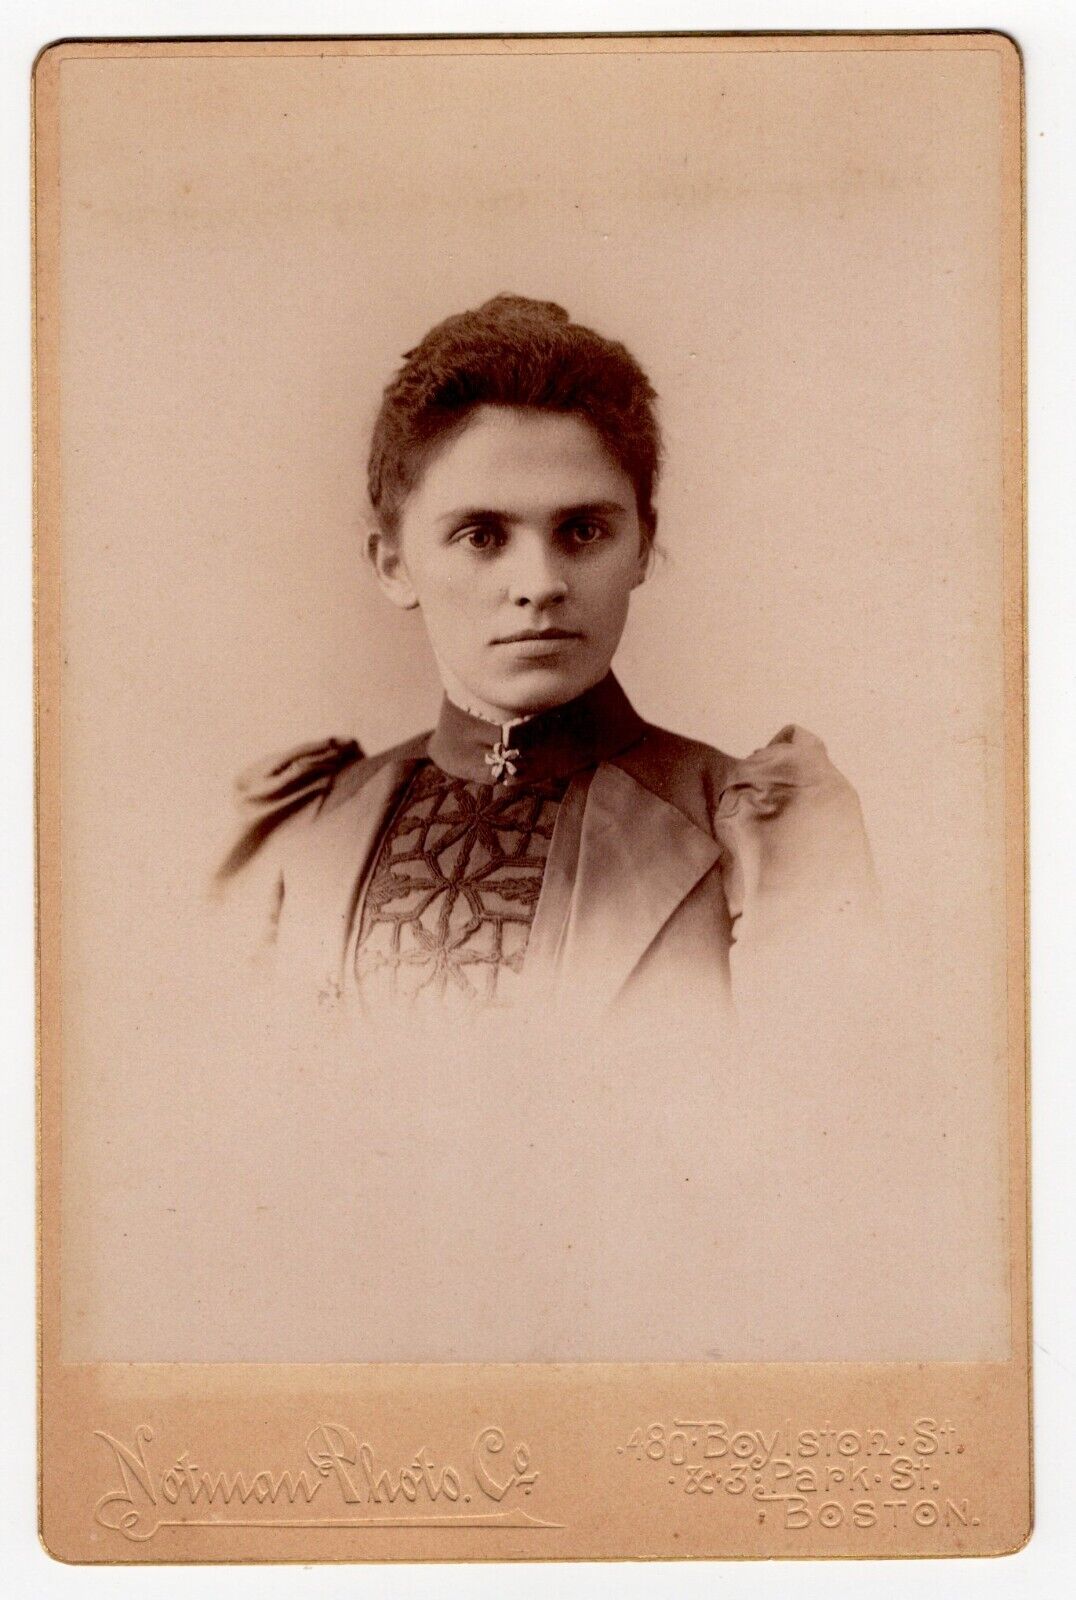 PORTRAIT OF A YOUNG WOMAN :BOSTON, MASSACHUSETTS :PHOTO BY NOTMAN : CABINET CARD